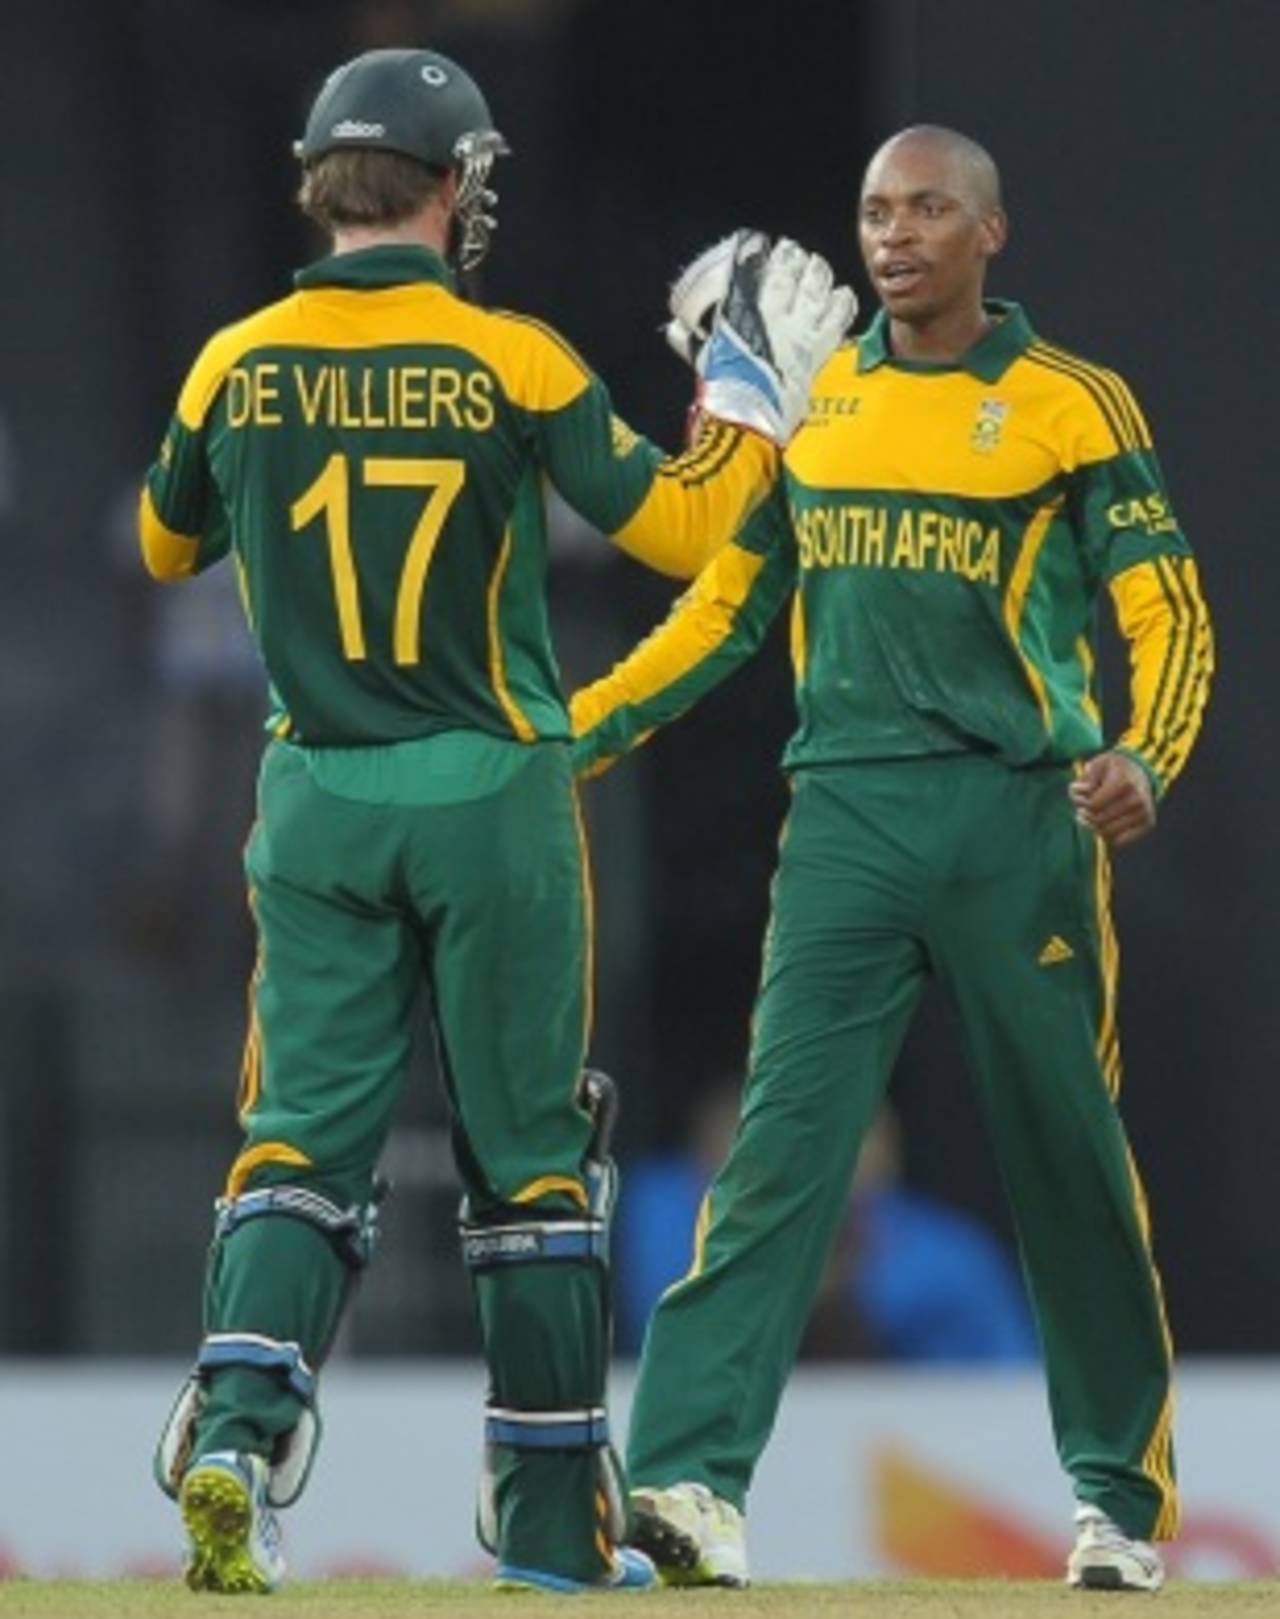 AB de Villiers said Aaron Phangiso bowled well at the death in the first ODI&nbsp;&nbsp;&bull;&nbsp;&nbsp;AFP